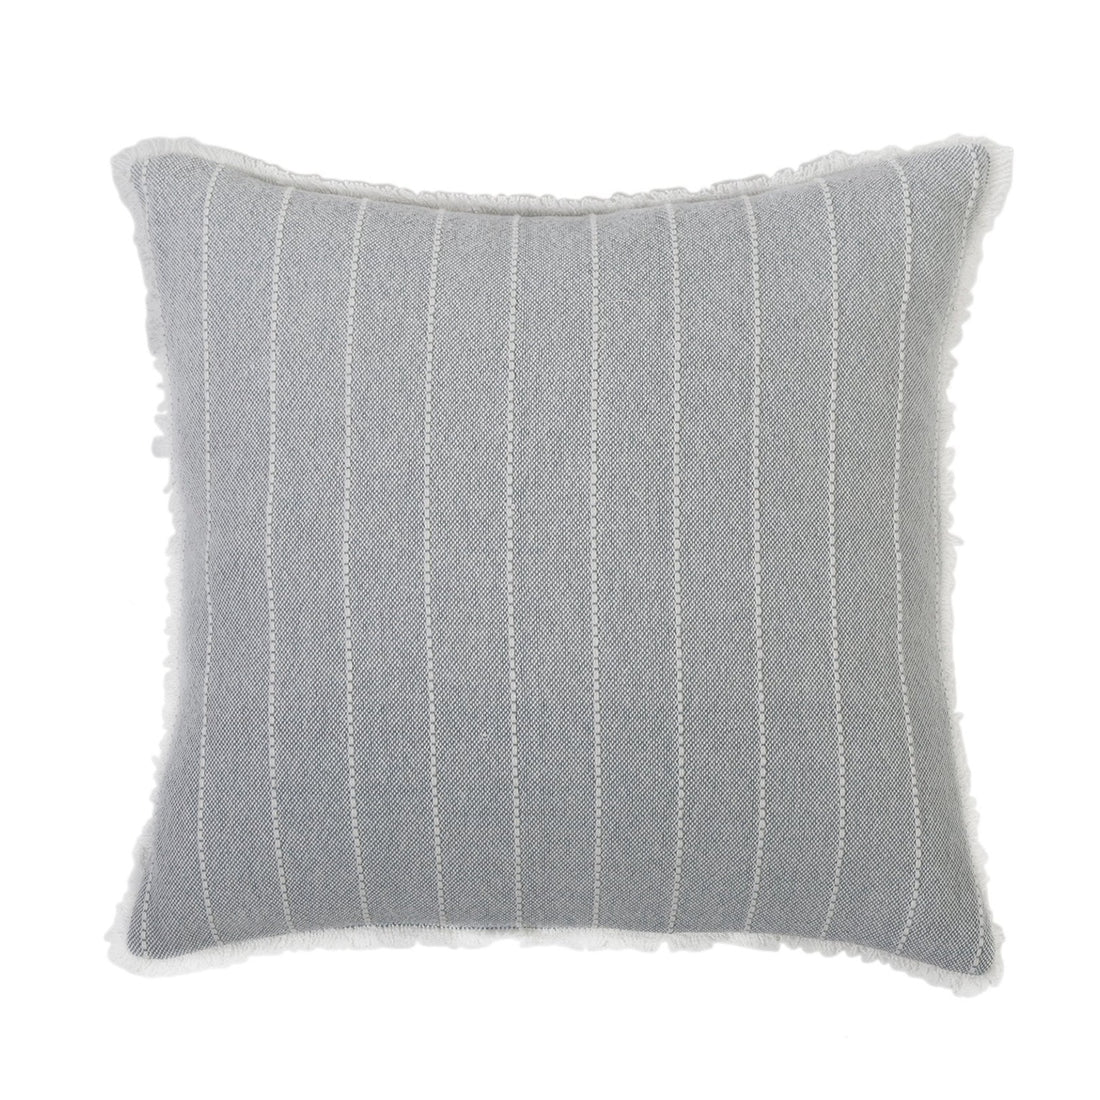 Henley Square Pillow, Sky